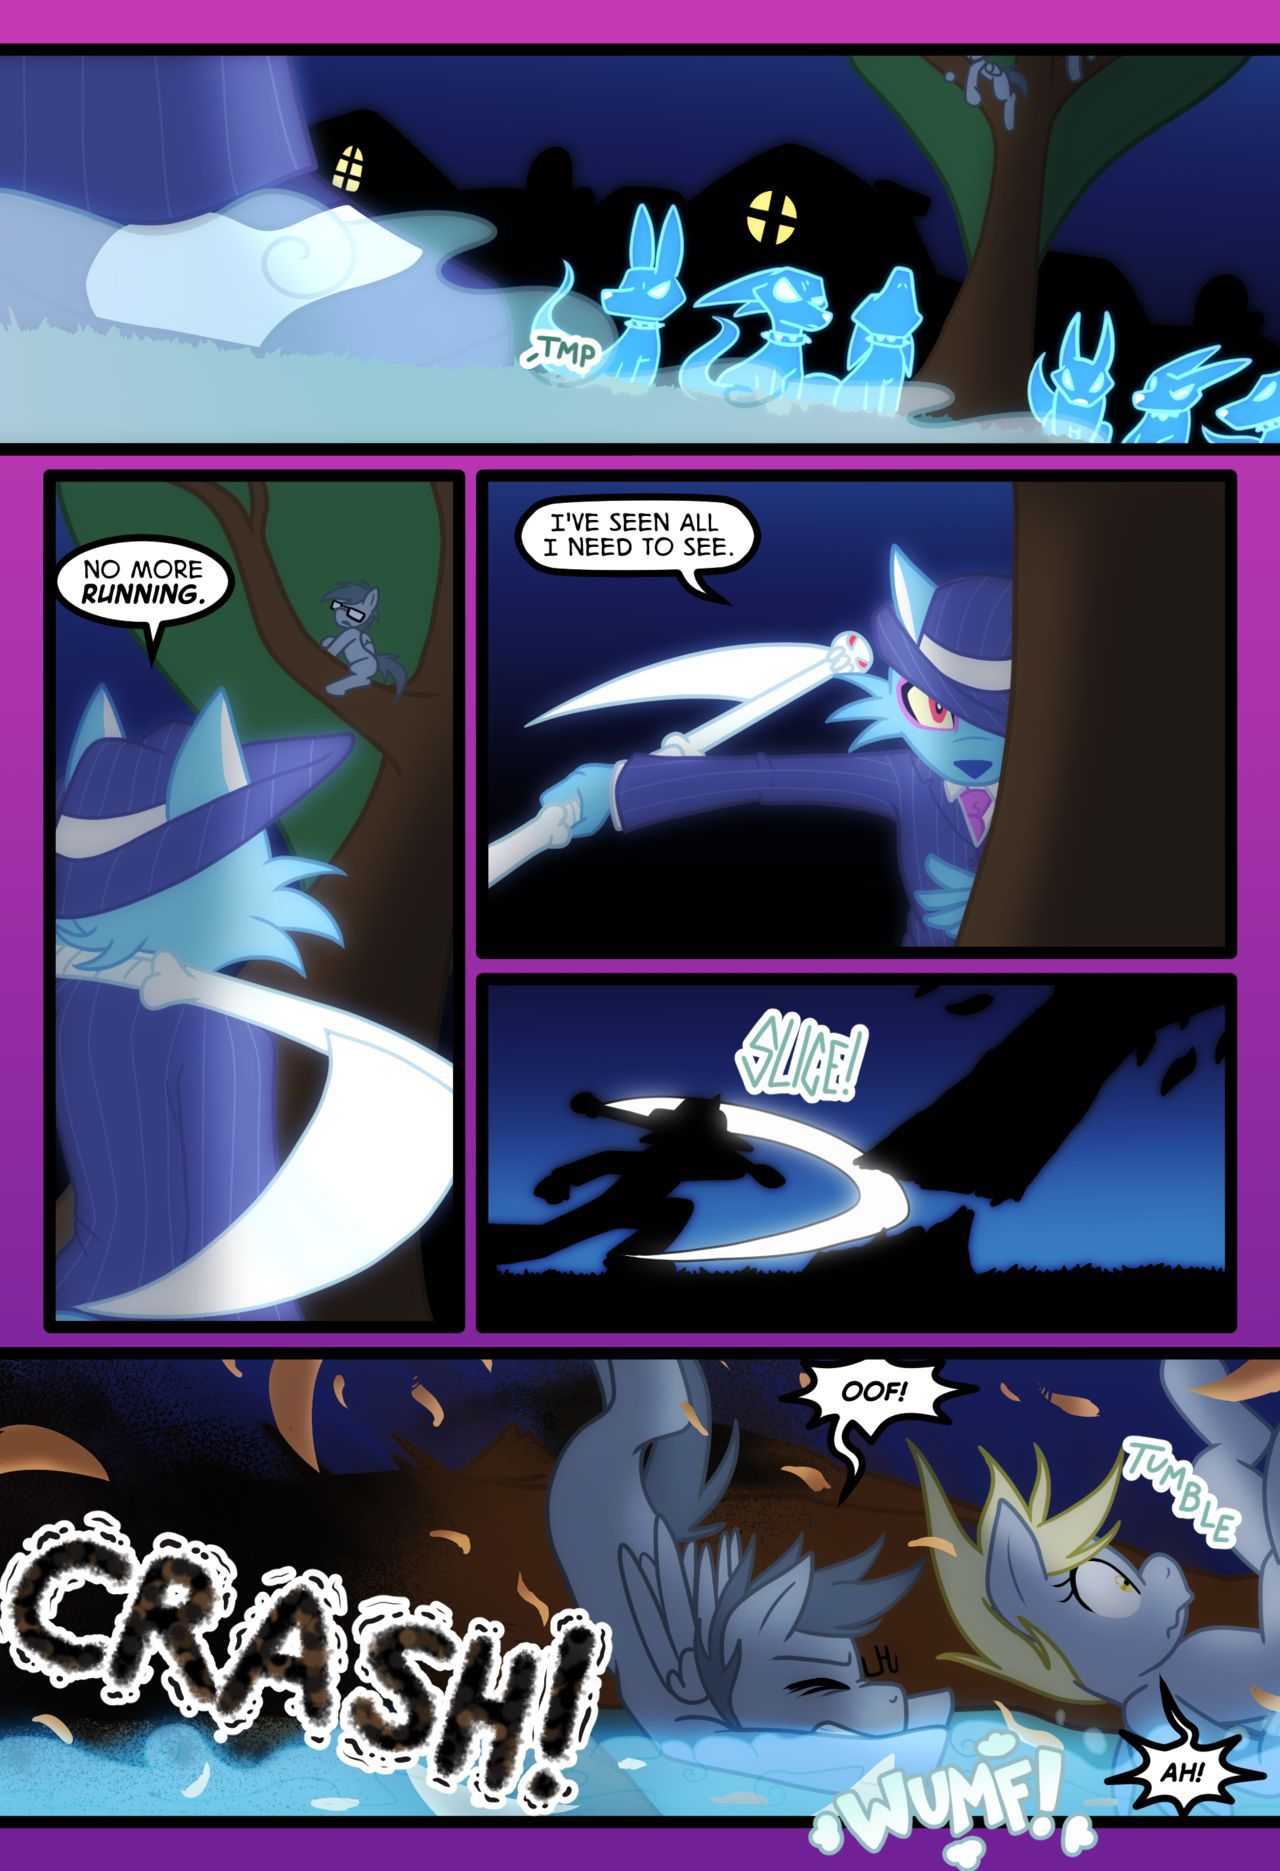 [Zaron] Lonely Hooves (My Little Pony Friendship Is Magic) [Ongoing] 168